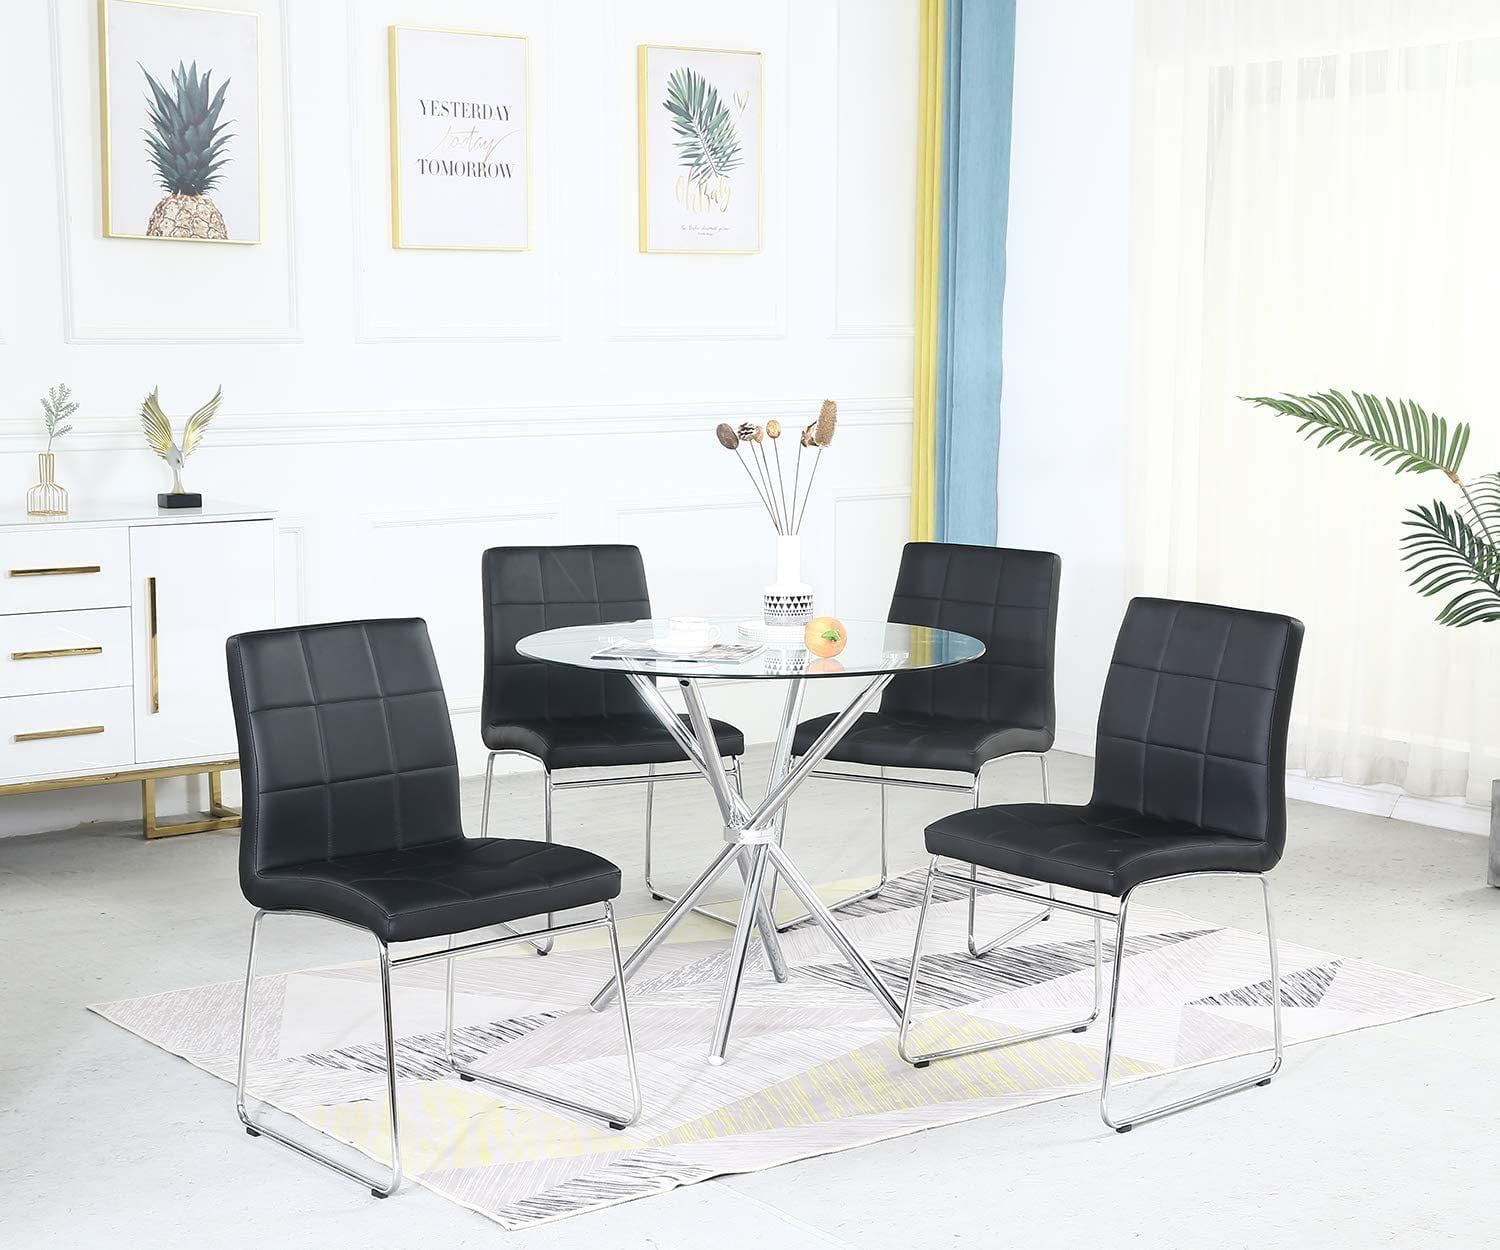 Details about   Black Tempered Glass Round Dining Table 2/4 Chairs Set PU Leather Chrome Legs 